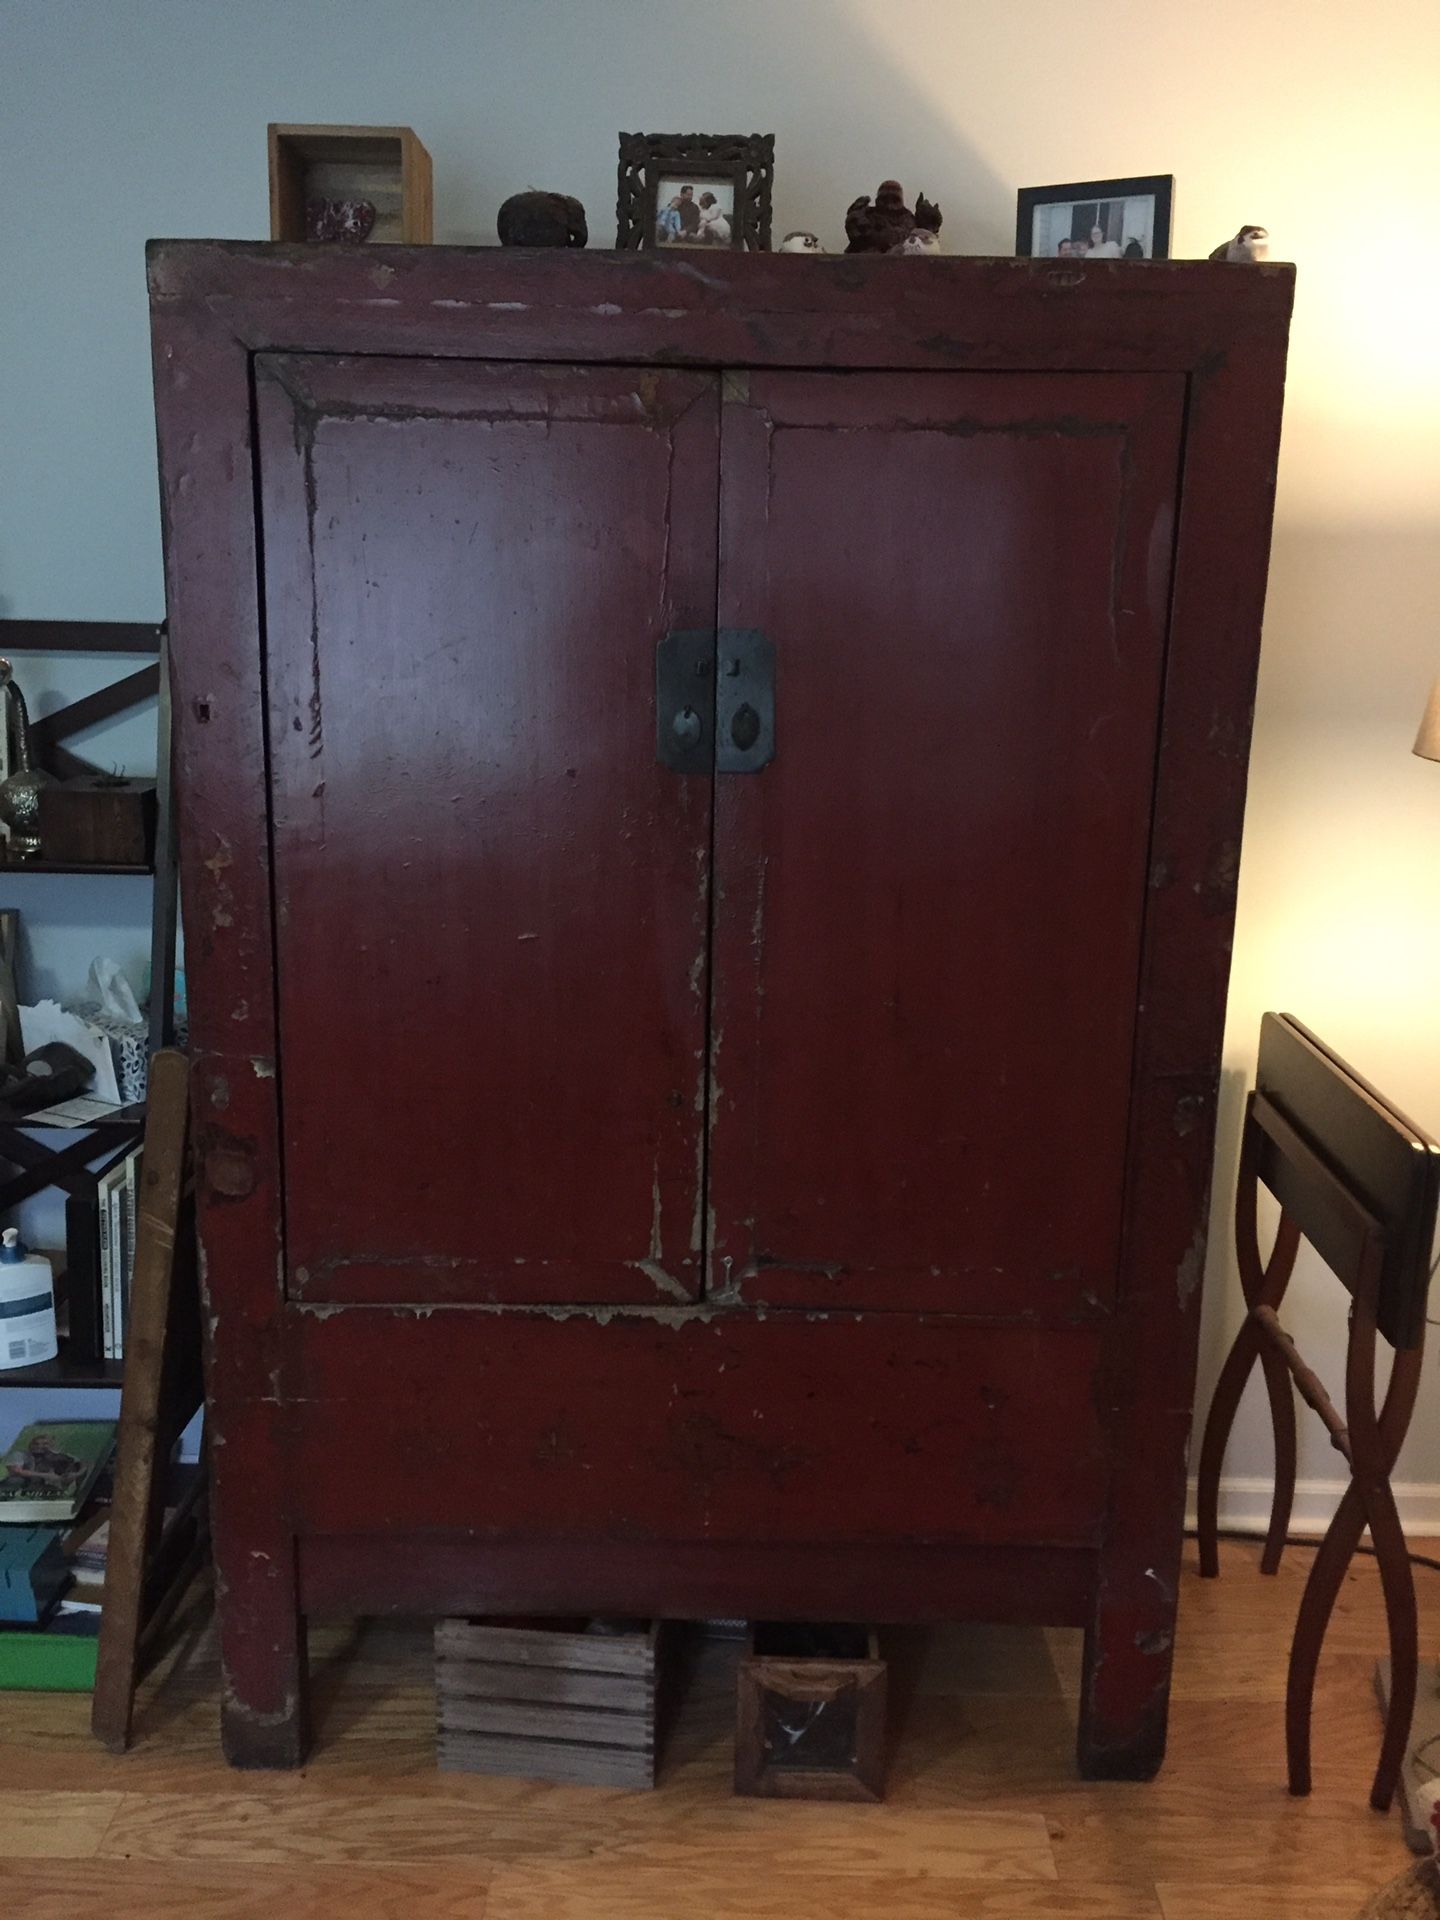 Need space- buy now!! Antique imported Chinese Armoire - gorgeous red w/ custom shelves - For sale or Trade! PRICE REDUCED!!